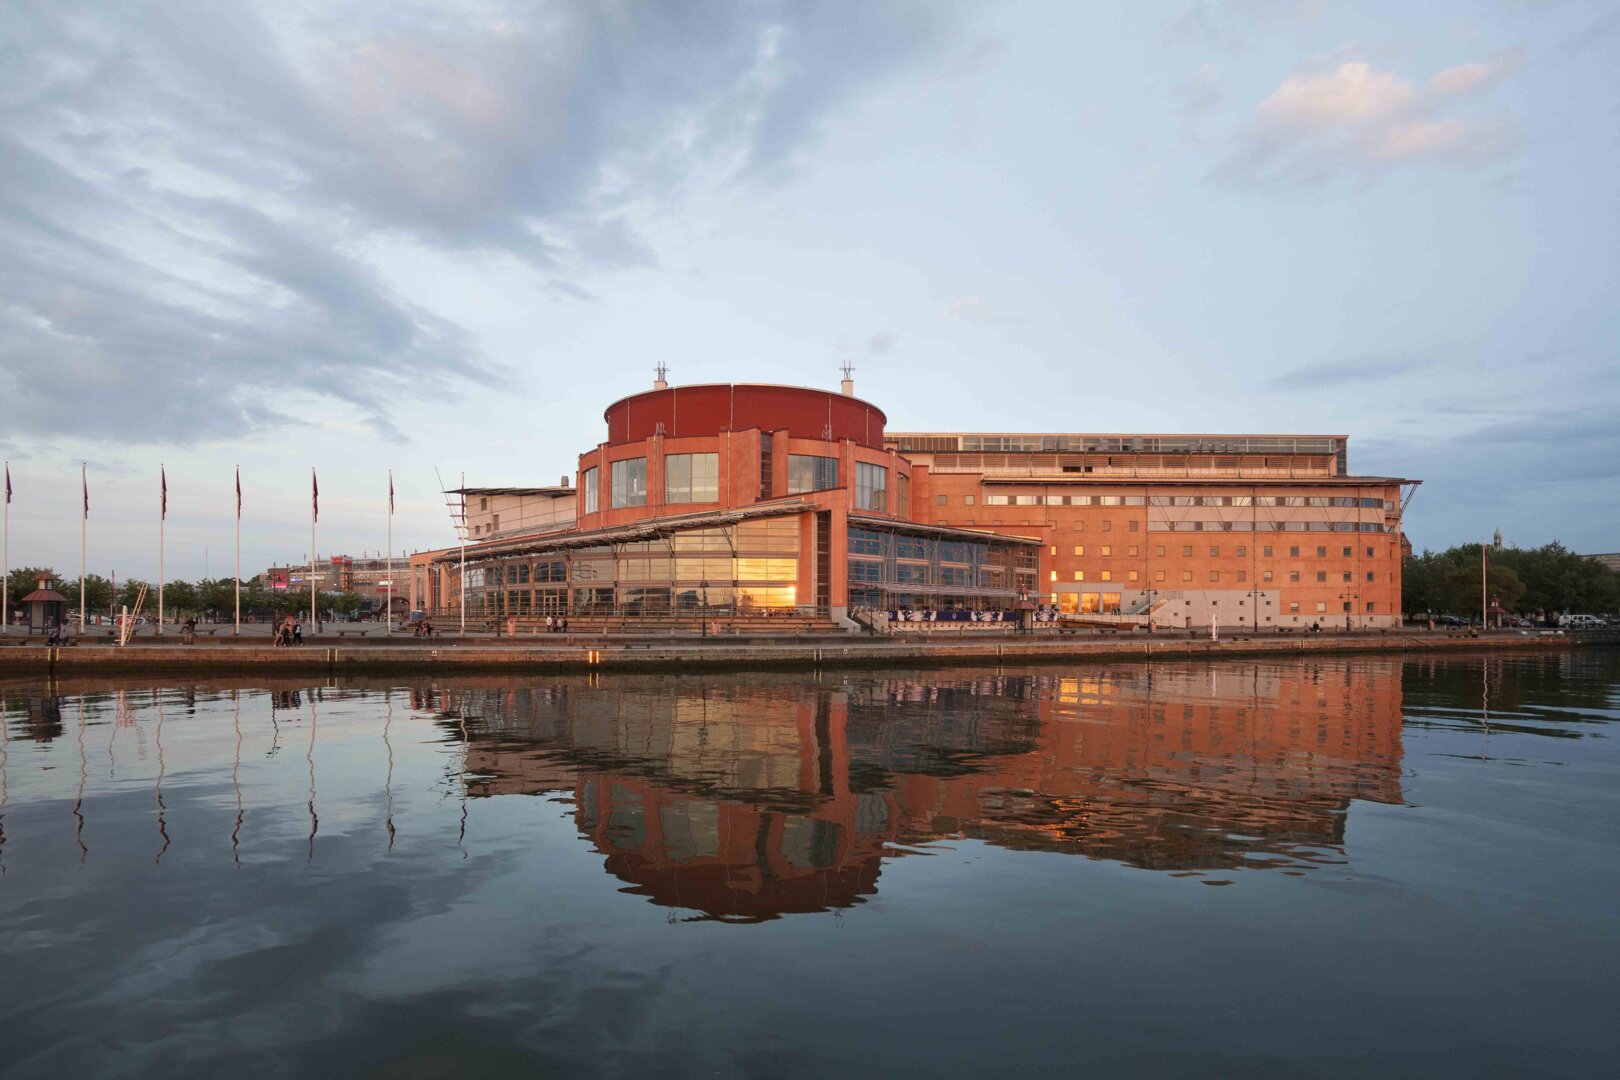 GöteborgsOperan on a summer evening. The building is in red brick and with large glass sections. In front of the building there is a bridge and then comes Göta Älv.